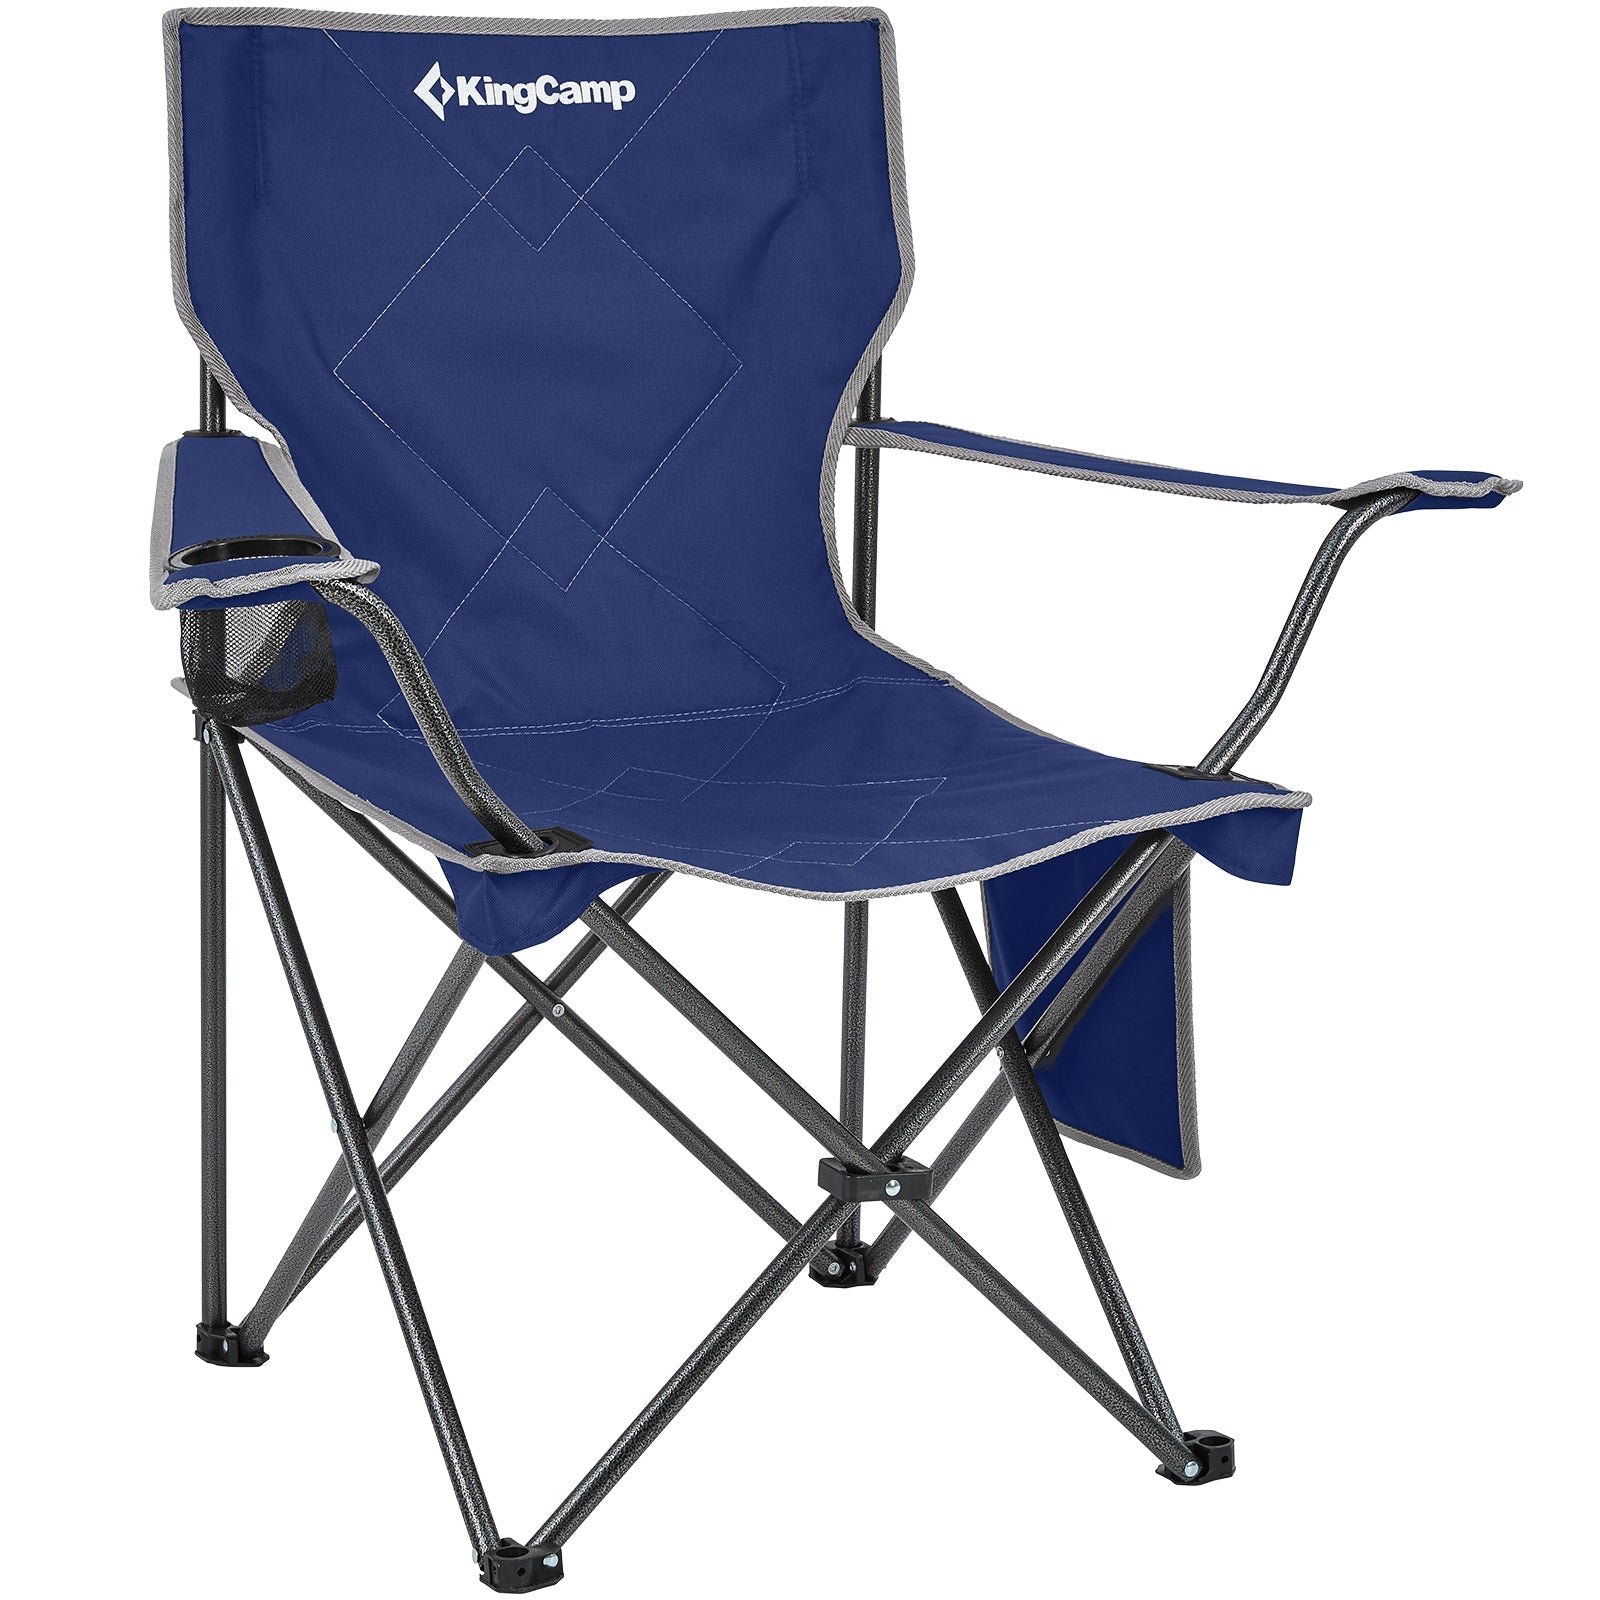 Buy Lightweight Folding Camping Chair from KingCamp